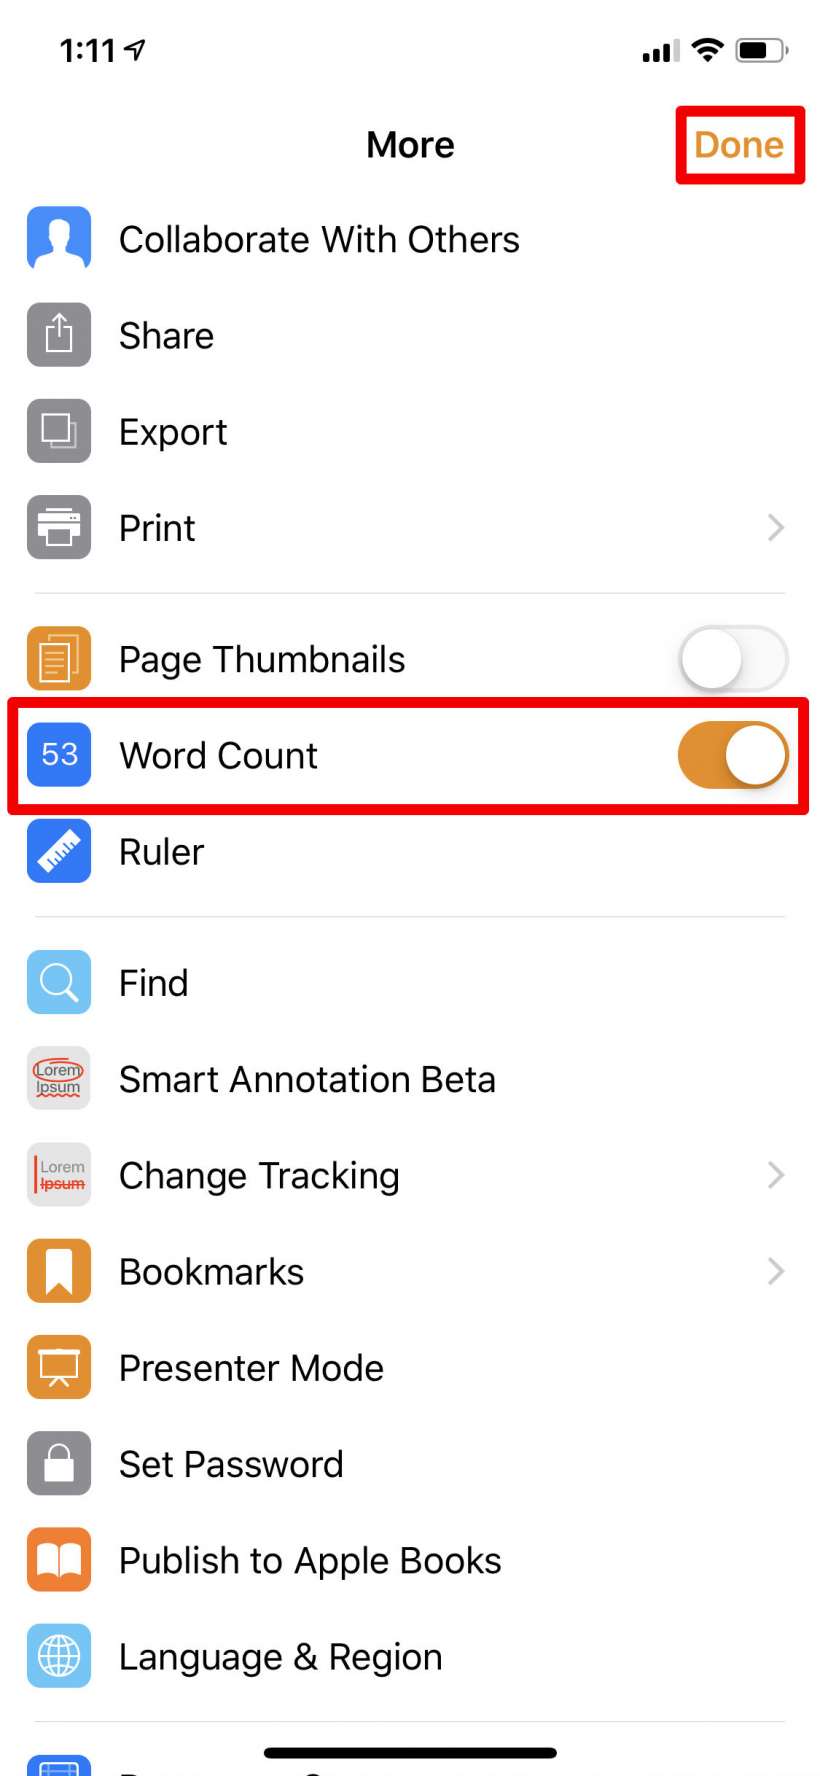 microsoft word word count of section in document